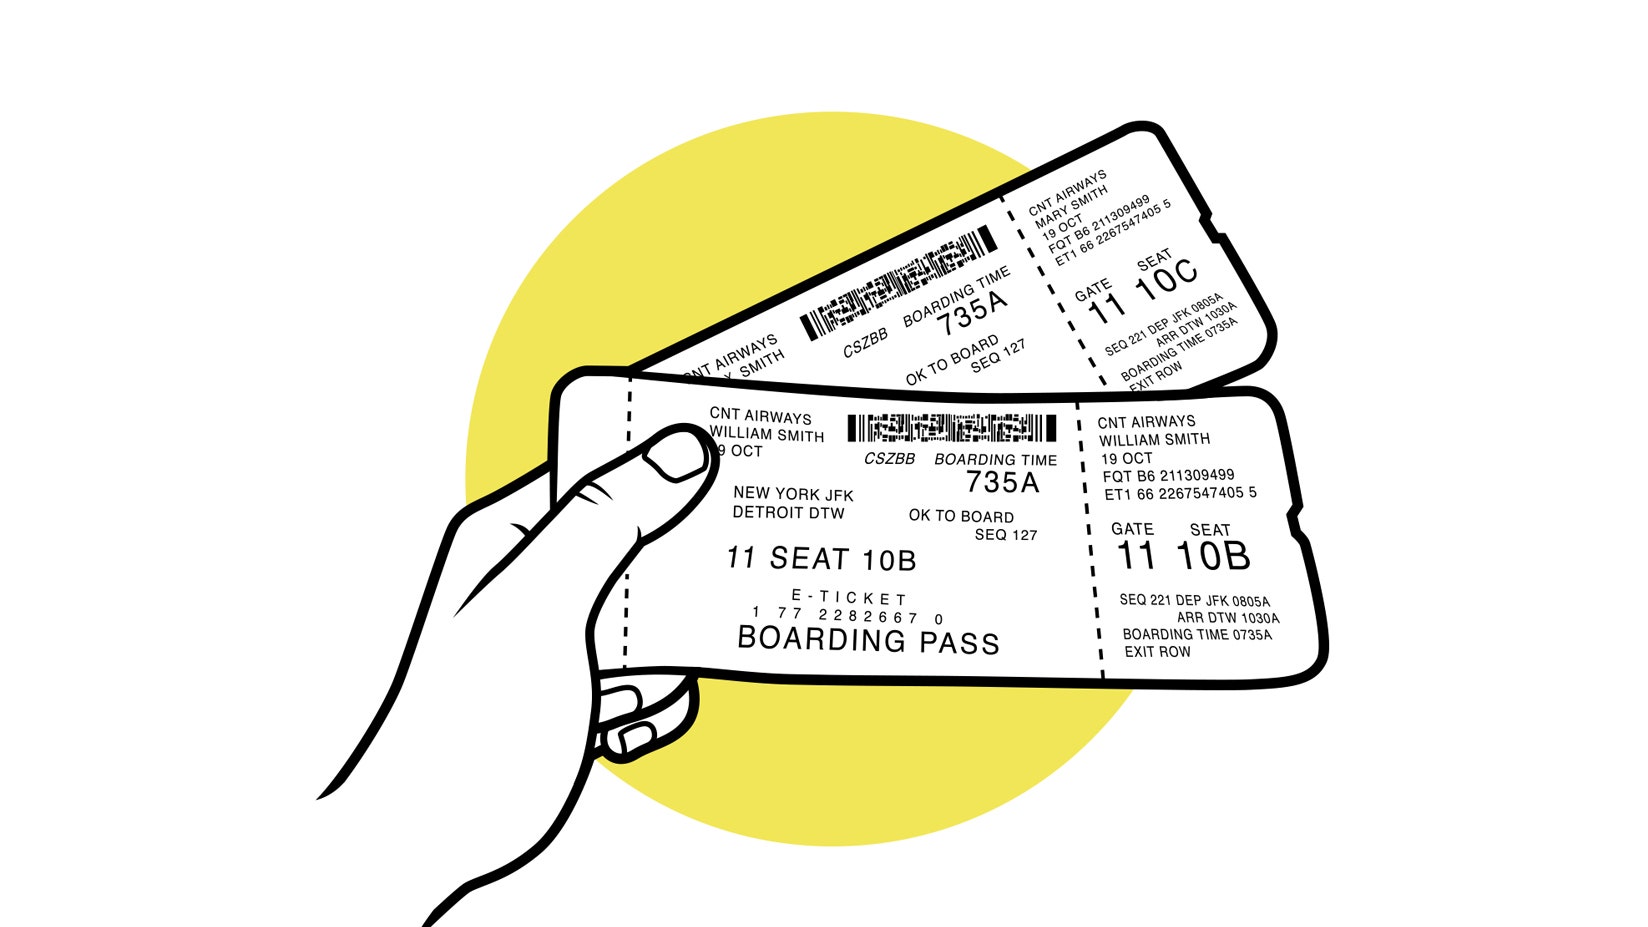 The Best Tips for Finding Affordable Airline Tickets